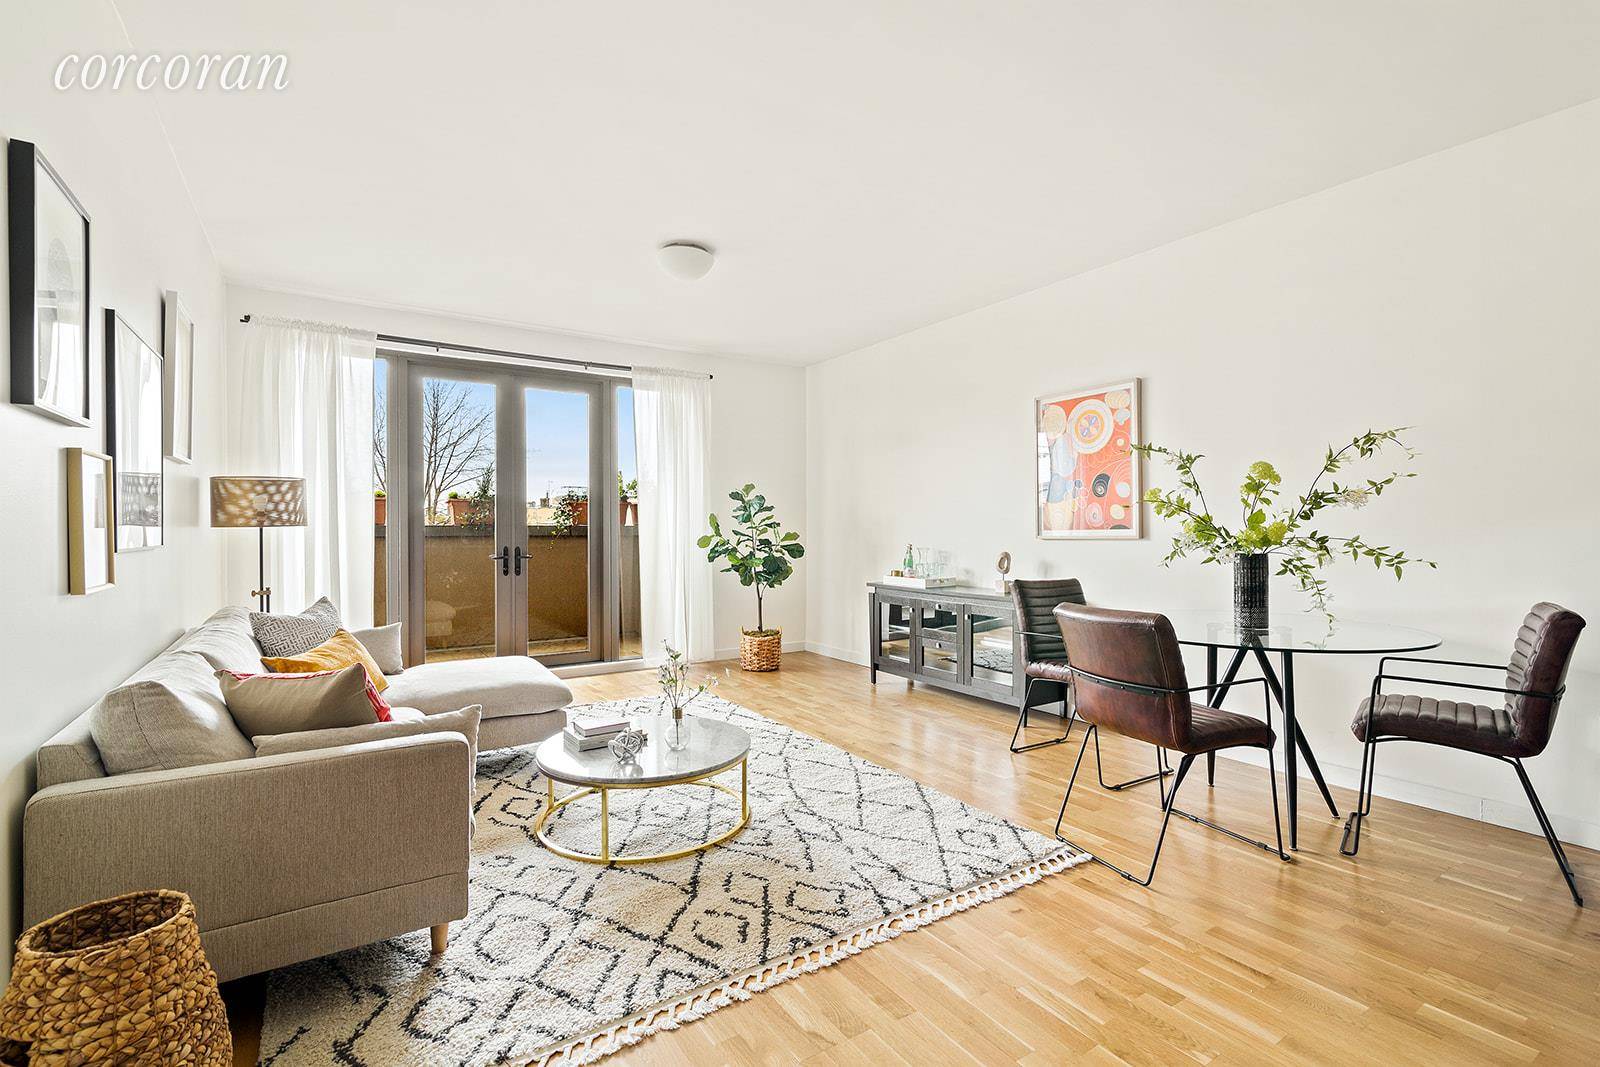 500 4th Ave, 2N Oversized 797 SF luxurious one bedroom in a hotel style condo building in Park Slope.